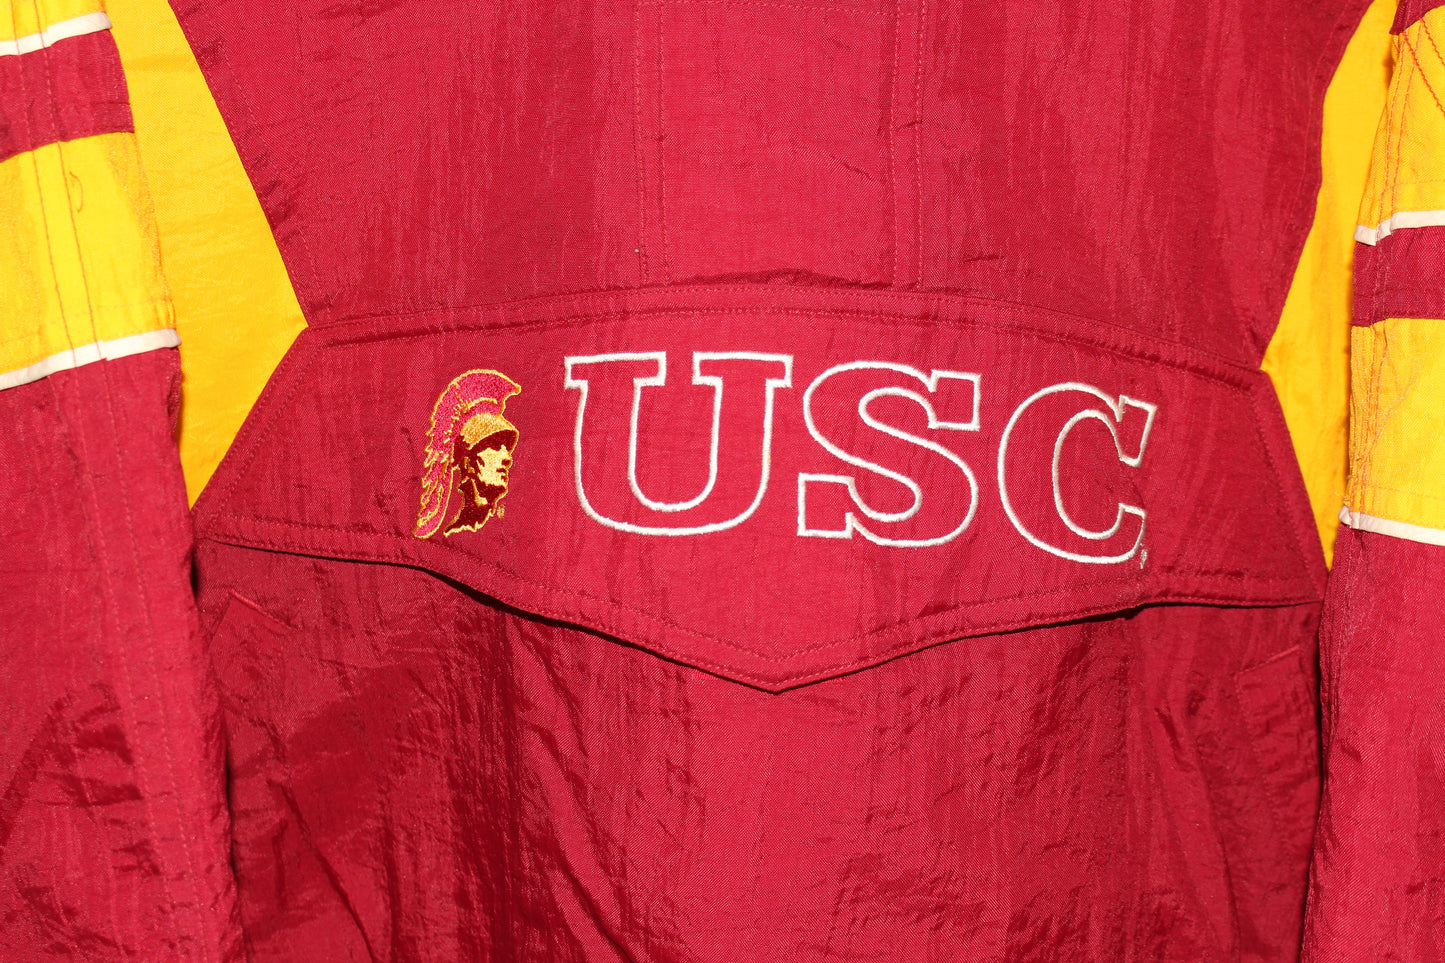 University Of Southern California Starter Pullover(XL)